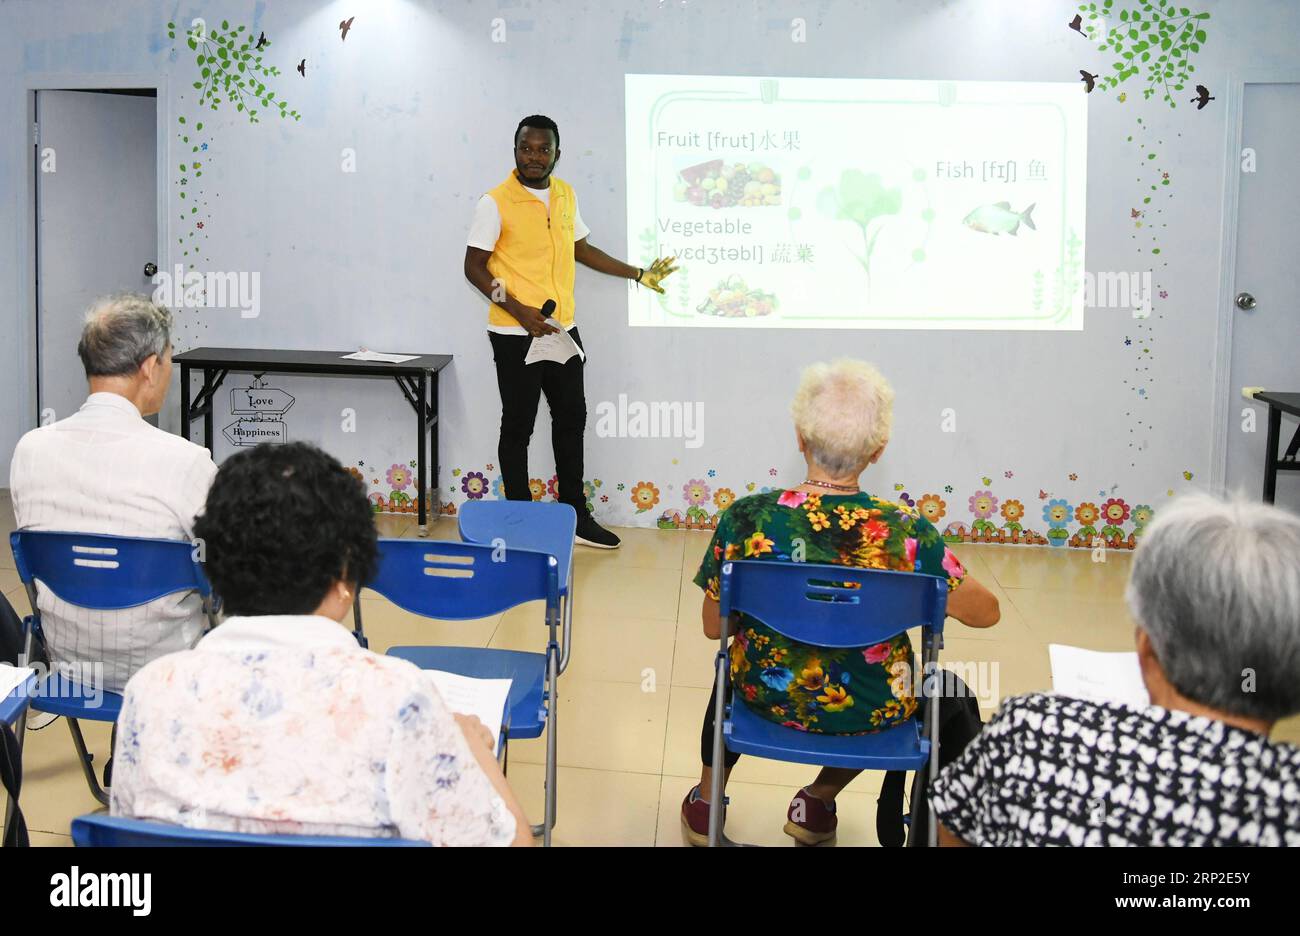 (180901) -- GUANGZHOU, Sept. 1, 2018 -- African student Kabey Heritier Lweny (C) teaches Chinese senior citizens English in Guangzhou, south China s Guangdong Province, Aug. 29, 2018. Kabey, who comes from the Democratic Republic of Congo, came to Guangdong University of Technology as a Chinese language major about a year ago. The rich Chinese cuisine and culture have always appealed to him, but it s by taking part in various volunteer activities that has made him embrace the life in Guangzhou ever more closely. I grew to learn more about the Chinese traditions and lifestyles as I joined Chine Stock Photo